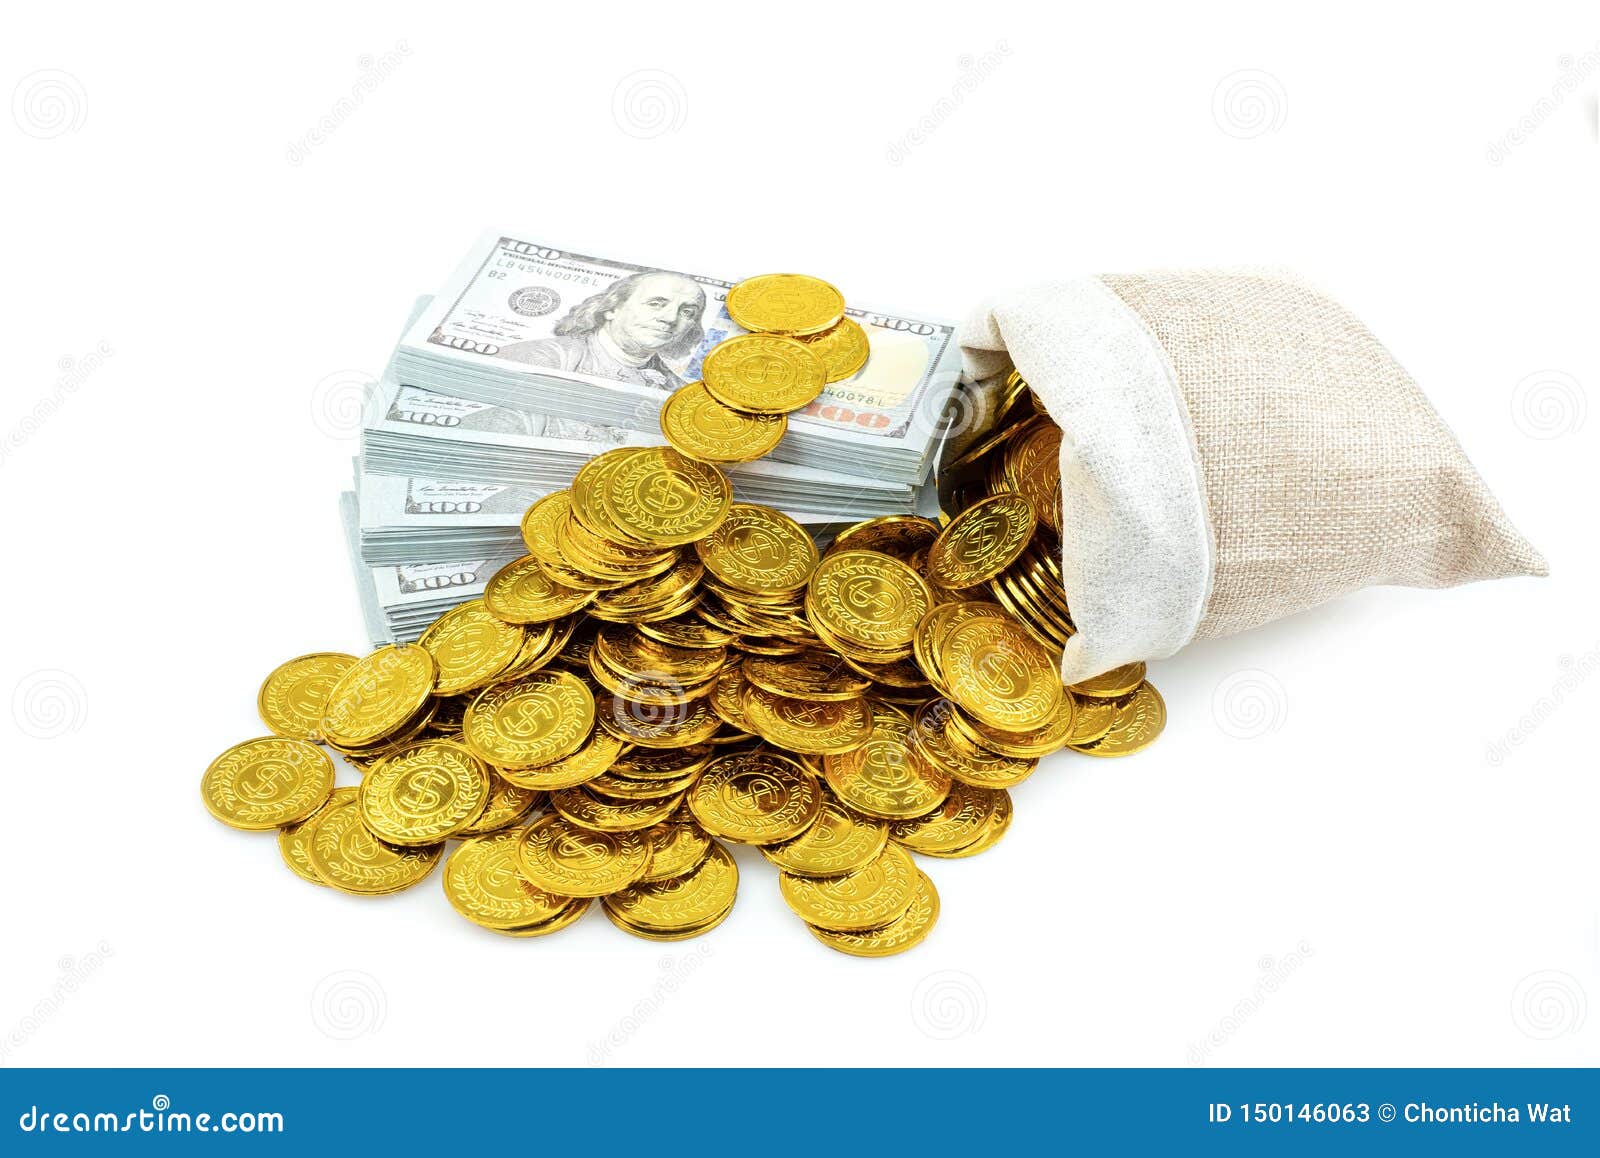 Download 474 Dollars Bundles Photos Free Royalty Free Stock Photos From Dreamstime